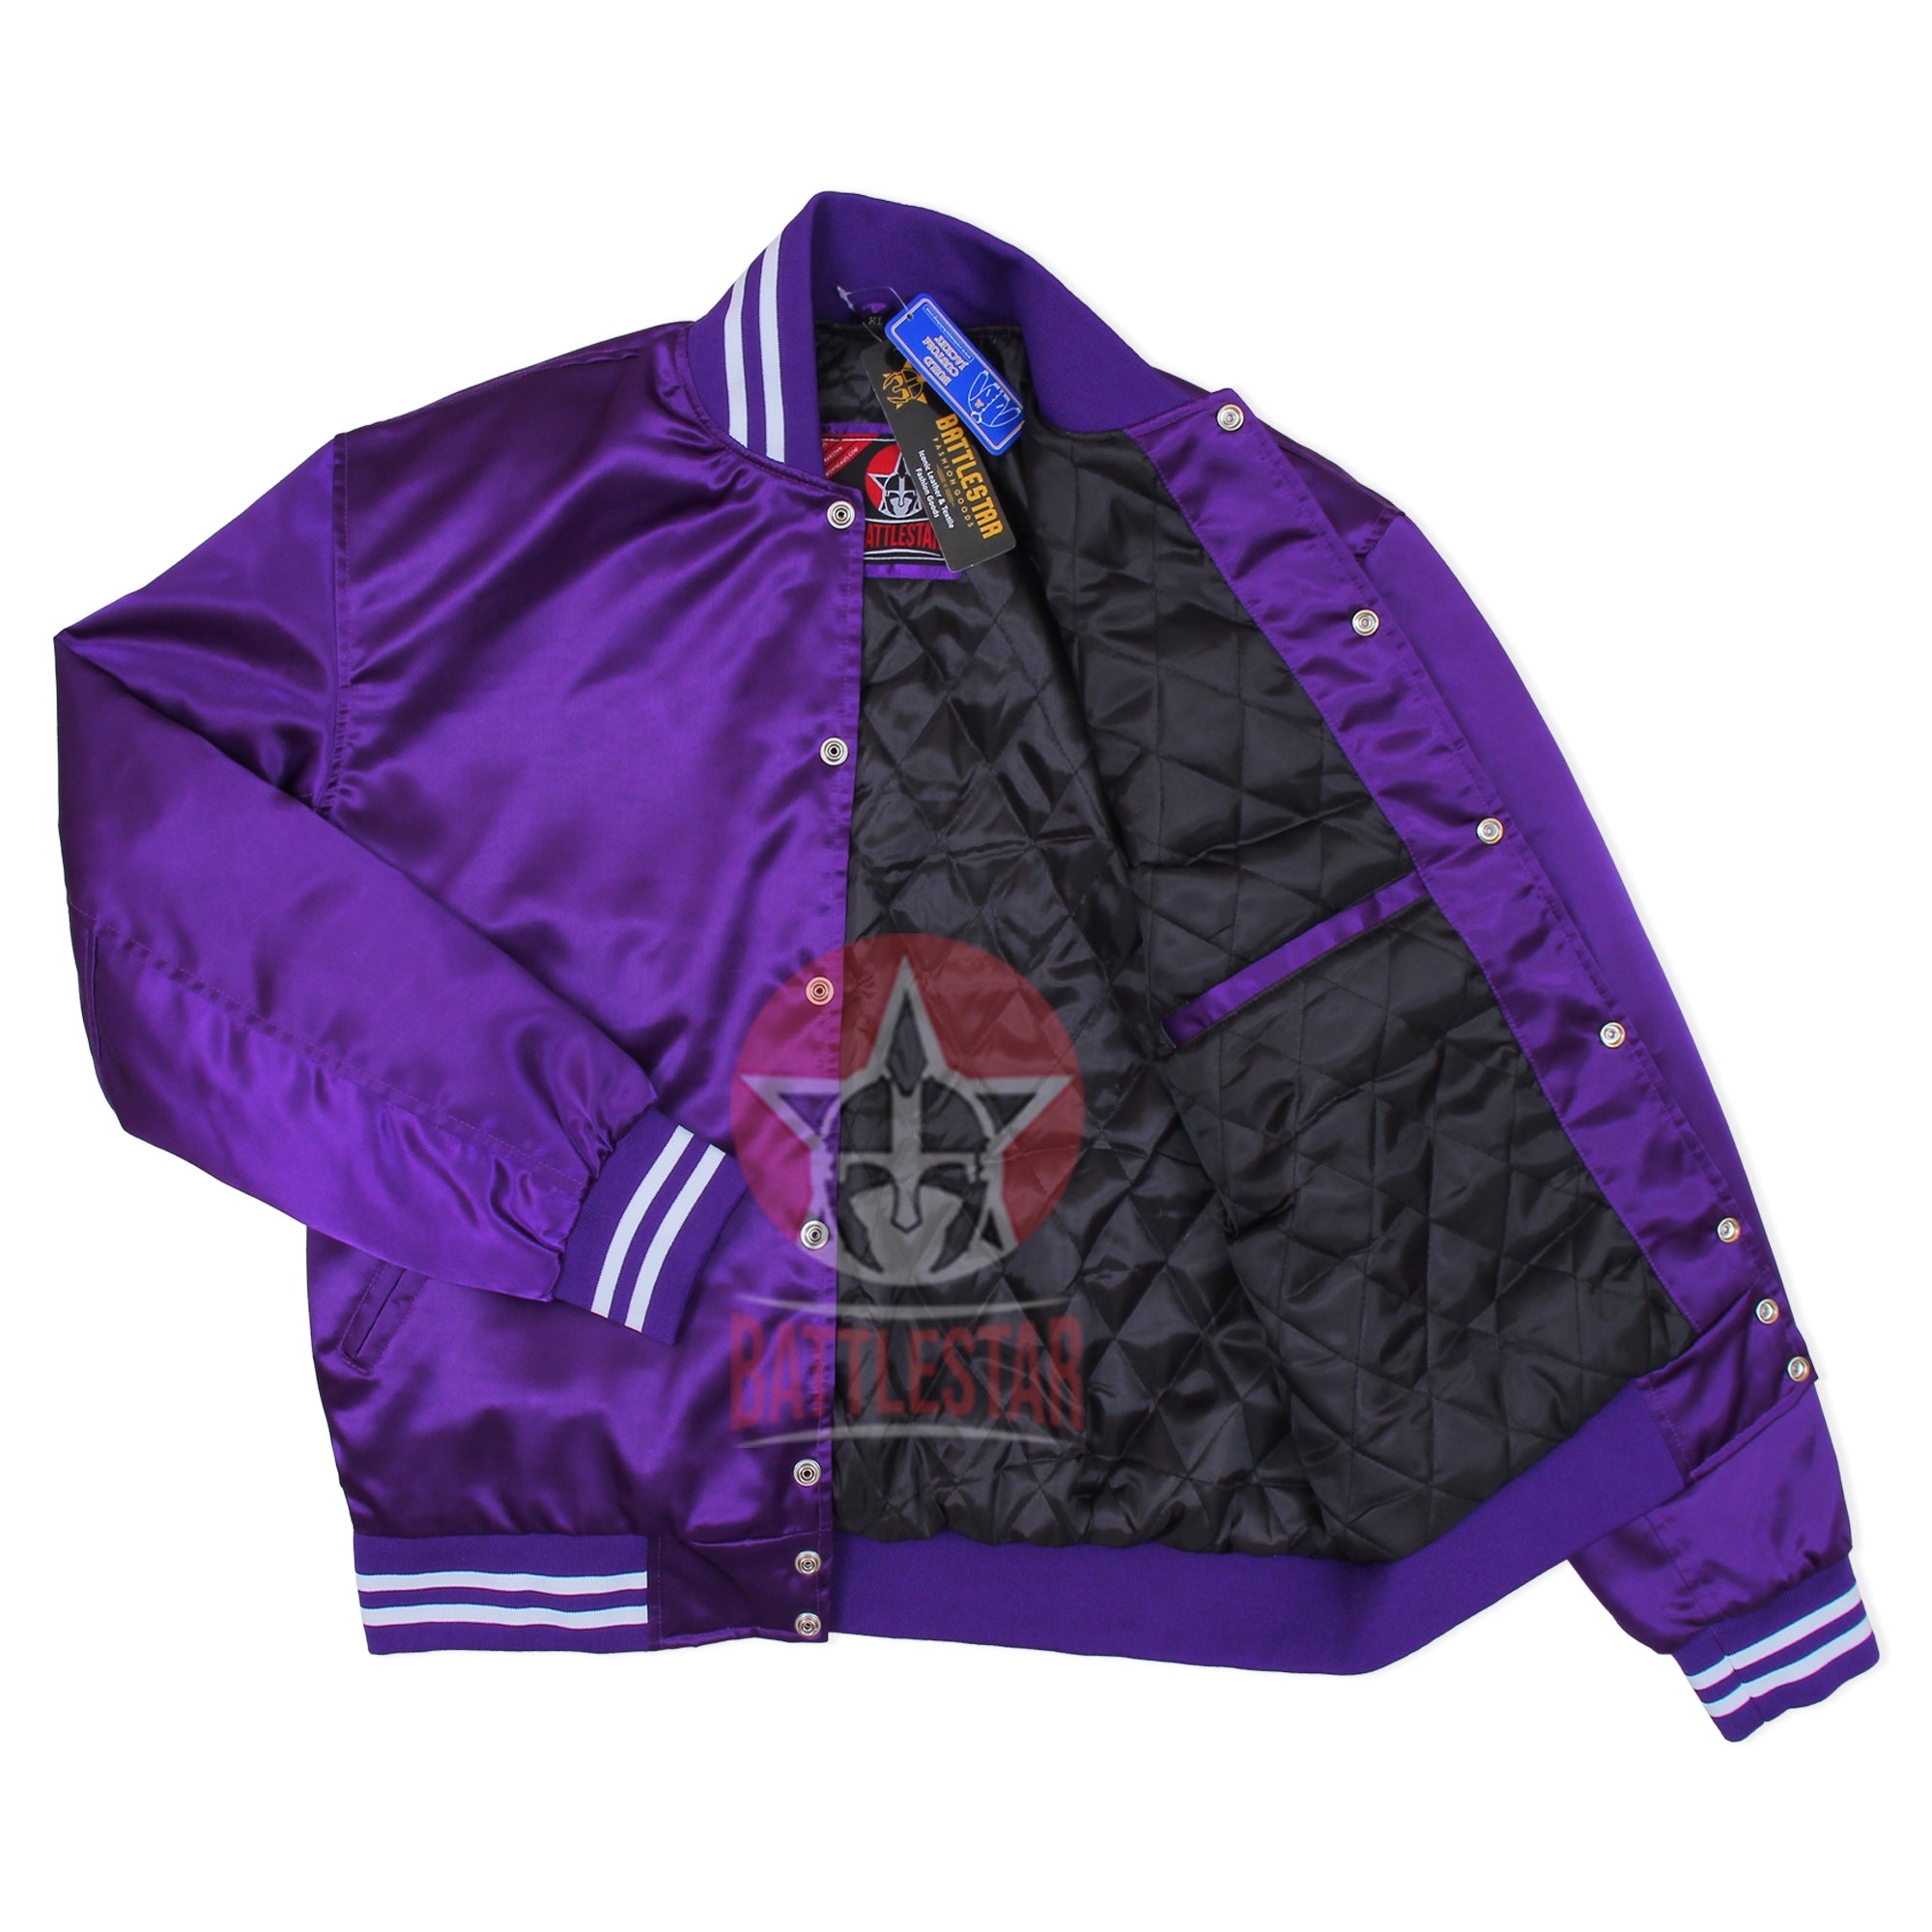 White Satin Baseball Jacket with Purple pockets and Knit lines